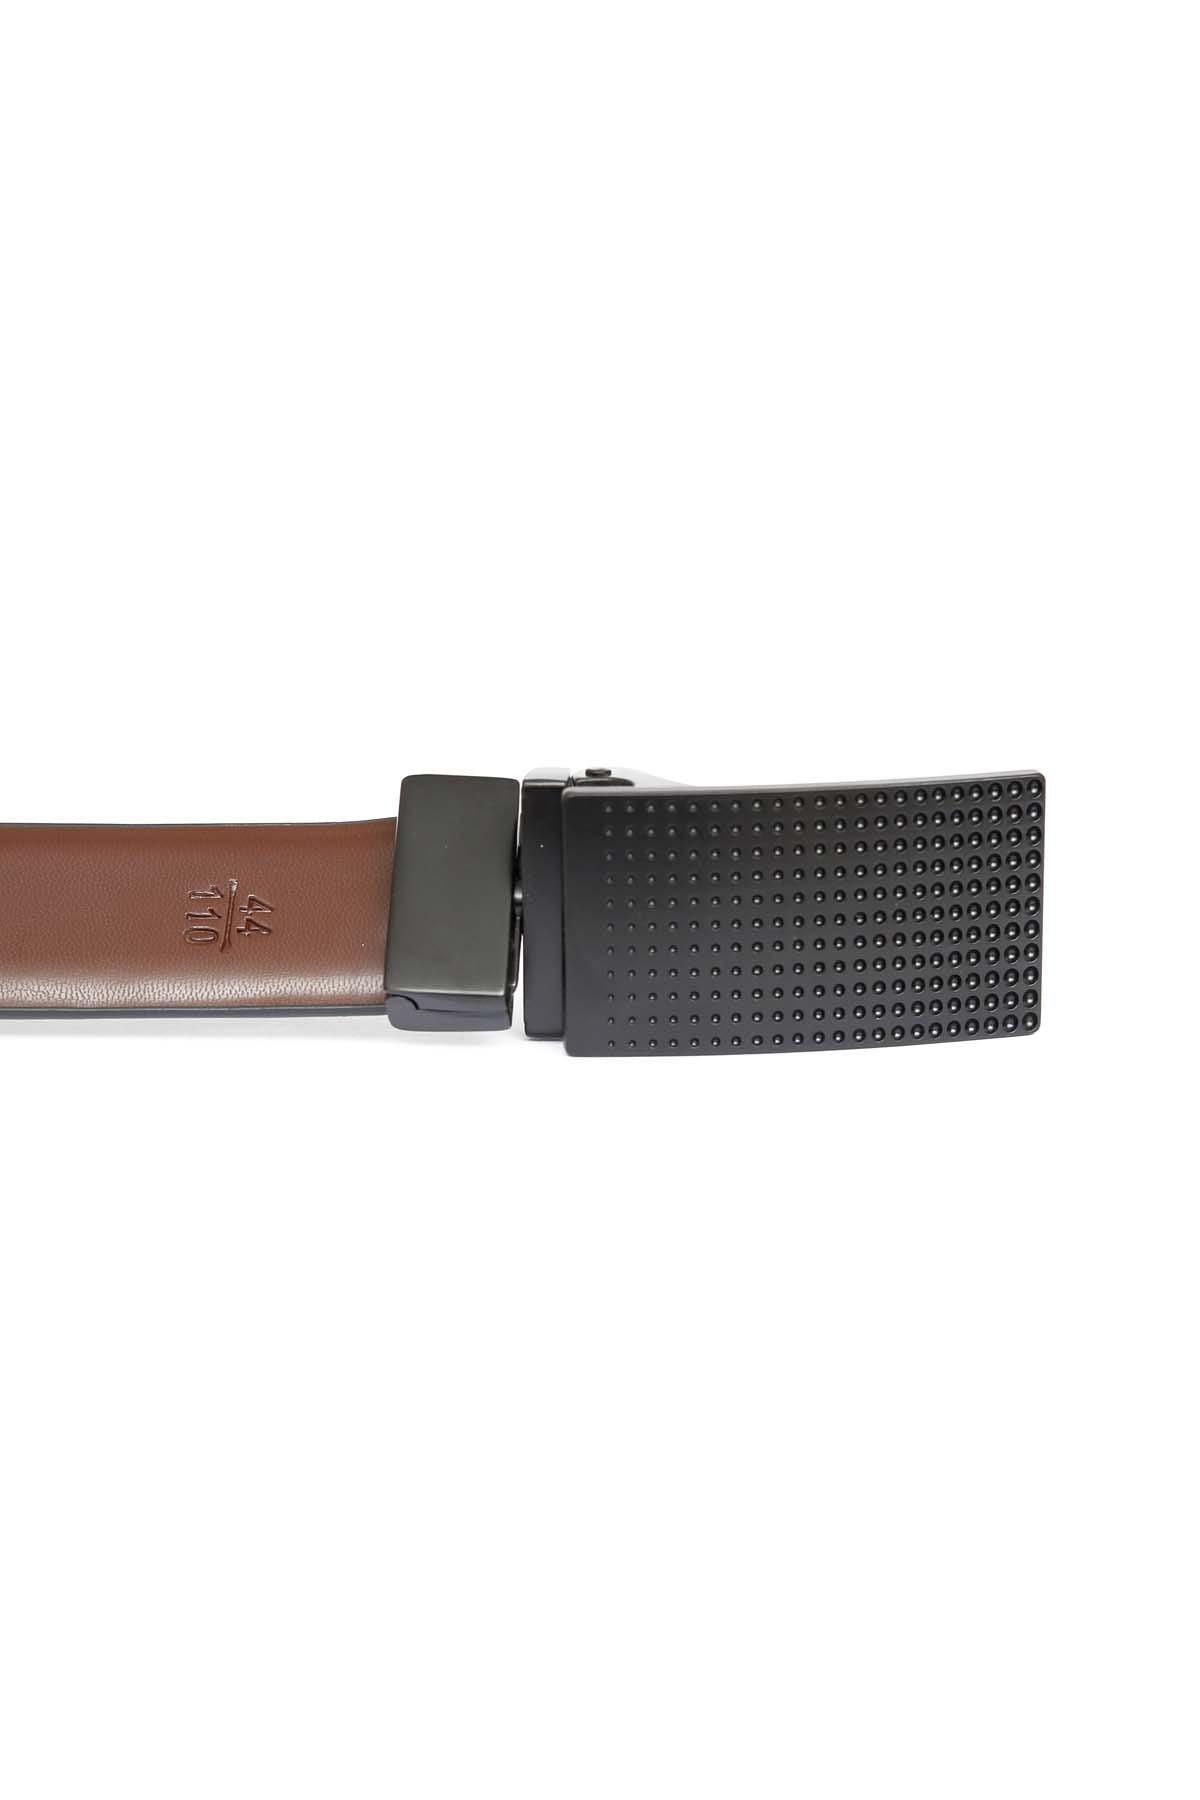 Reversible Belt at Charcoal Clothing